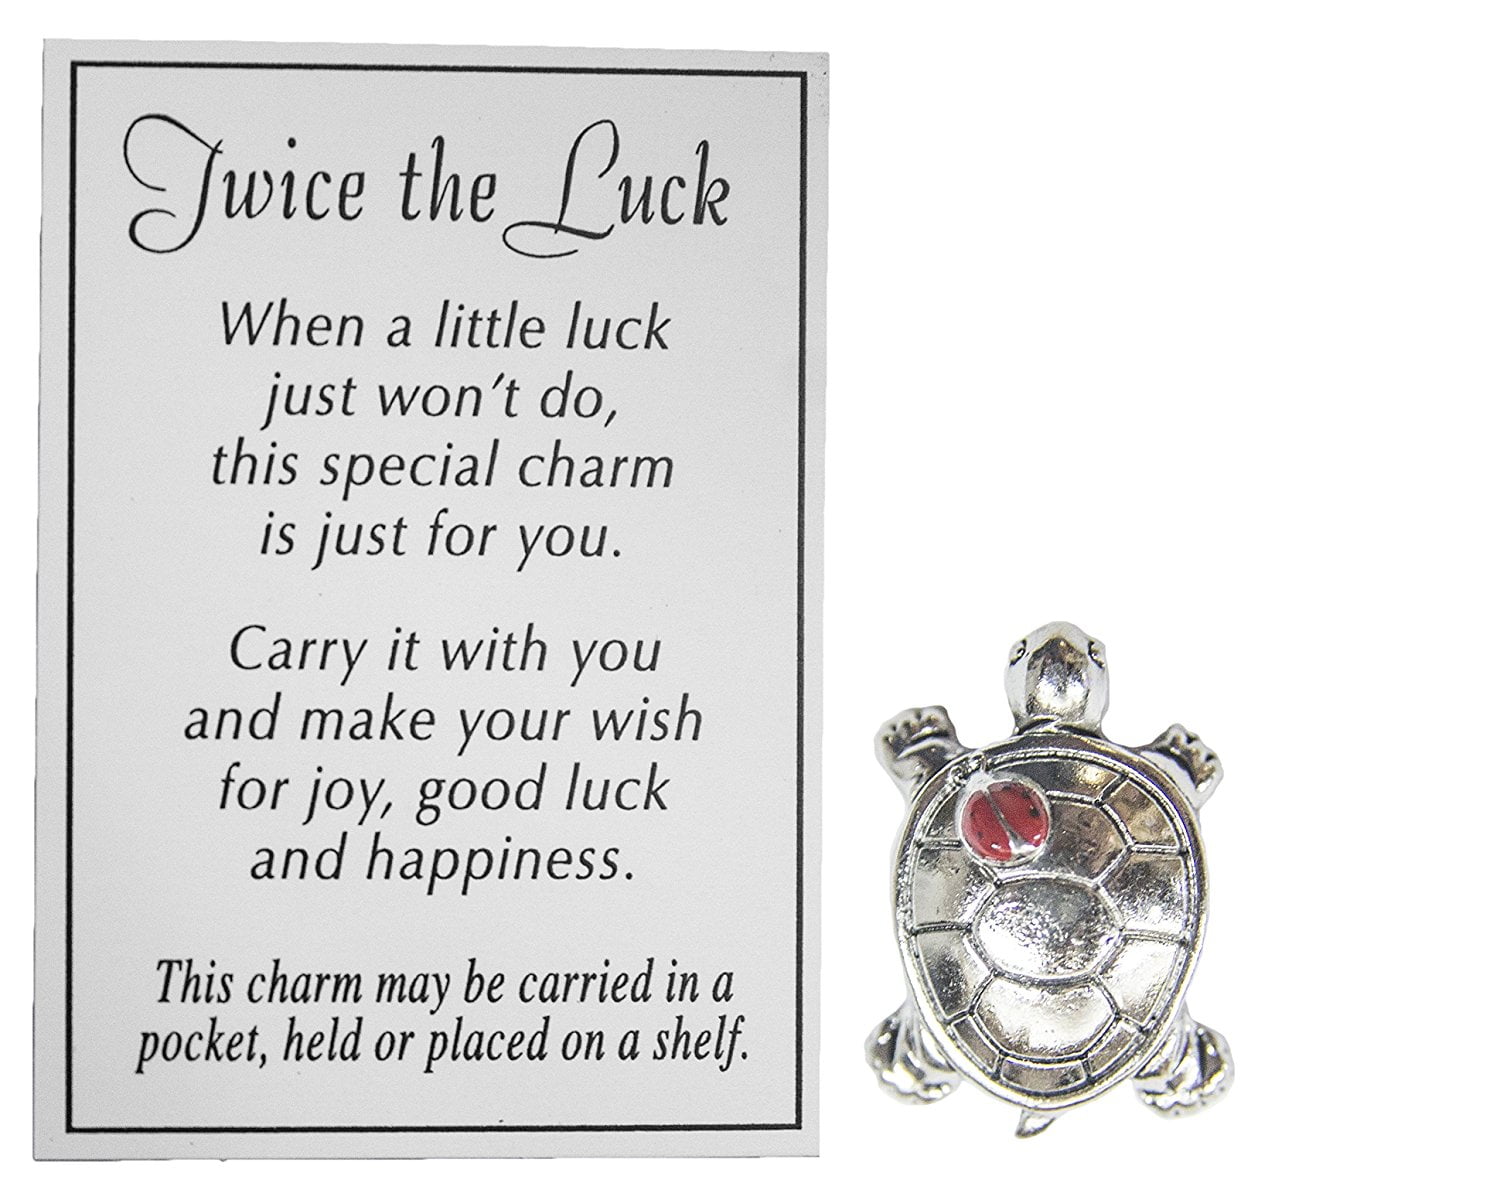 Twice The Luck Good Luck Pocket Charm Turtle Double Your Luck With This Unique Good Luck Charm By Ganz Walmart Com